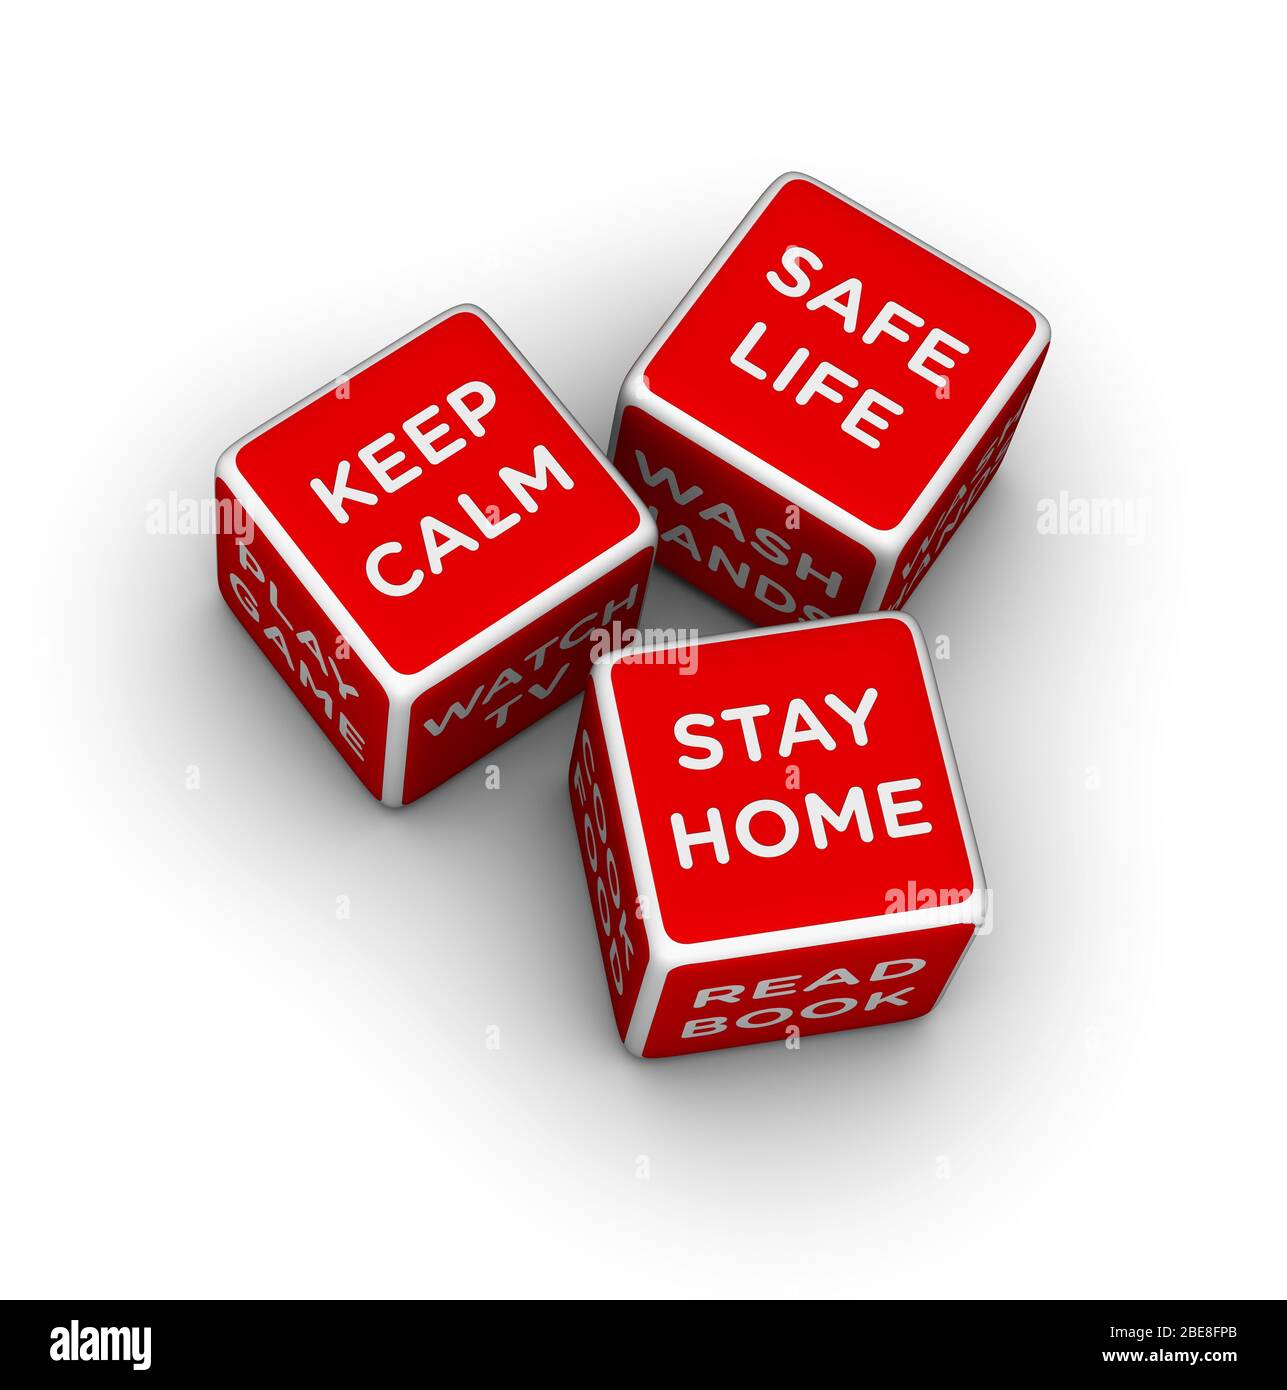 Dice with Stay Home, Keep Calm and Safe Life signs. 3D red cube illustration on white background. Stock Photo